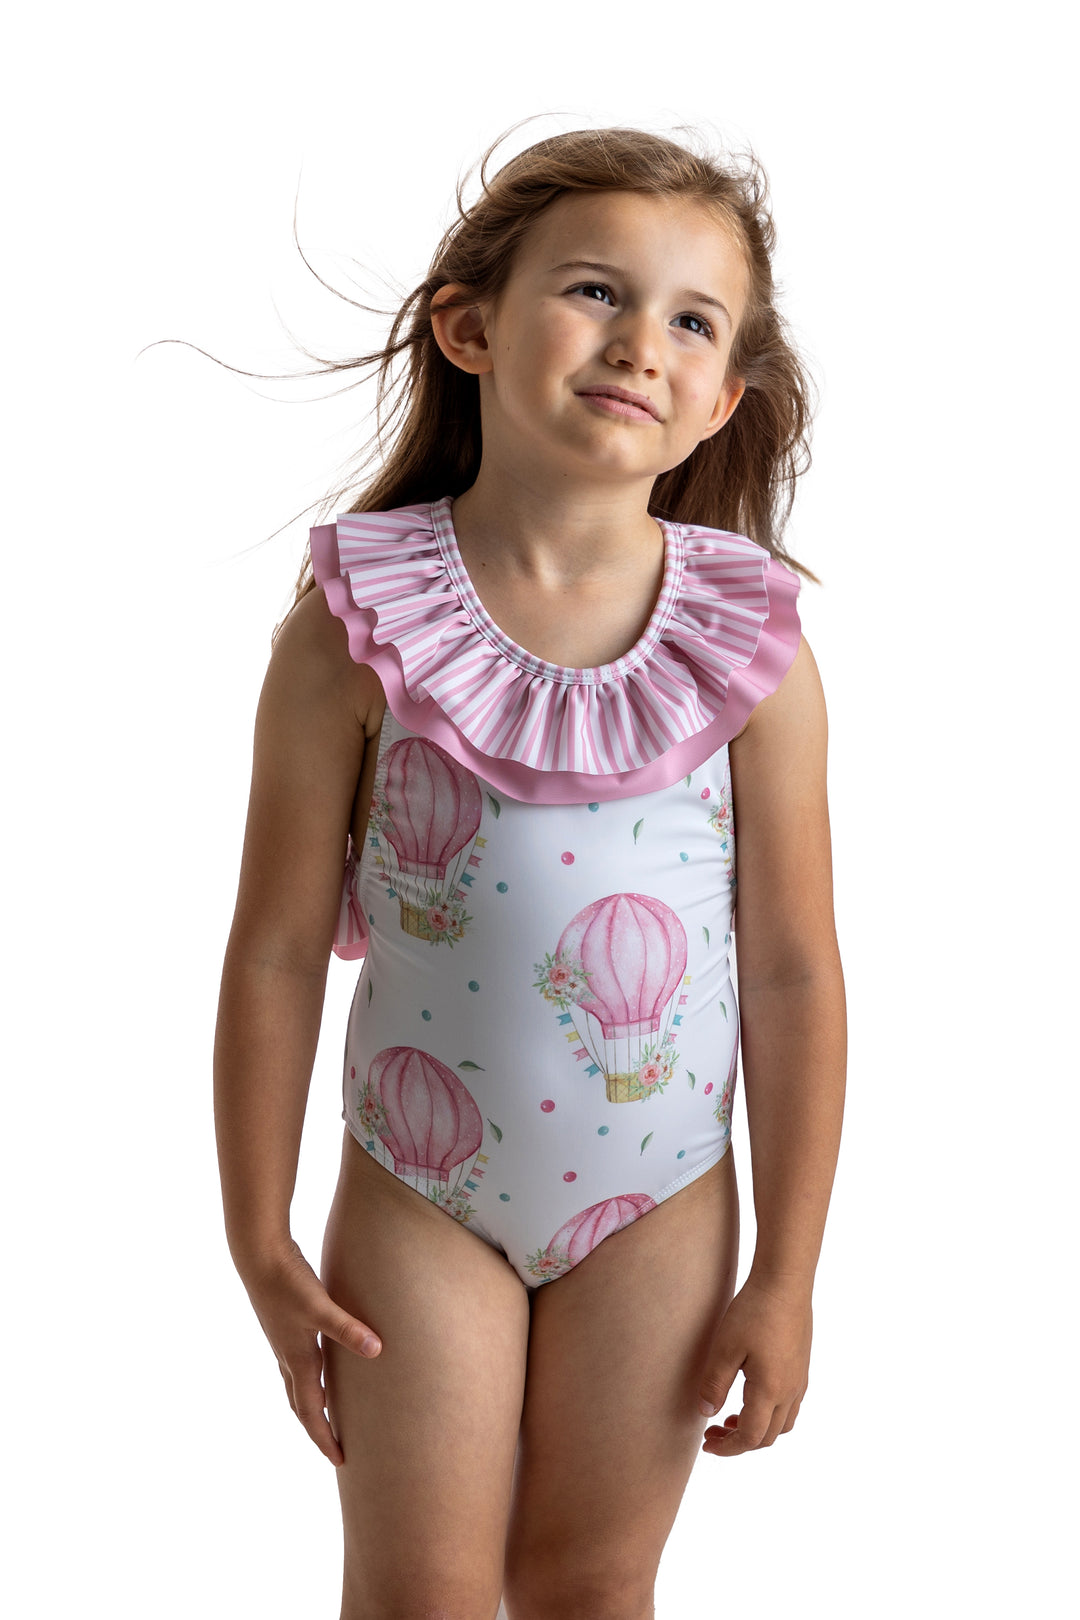 Meia Pata PREORDER - HOT AIR BALLOONS "Seychelles" Swimsuit | Millie and John